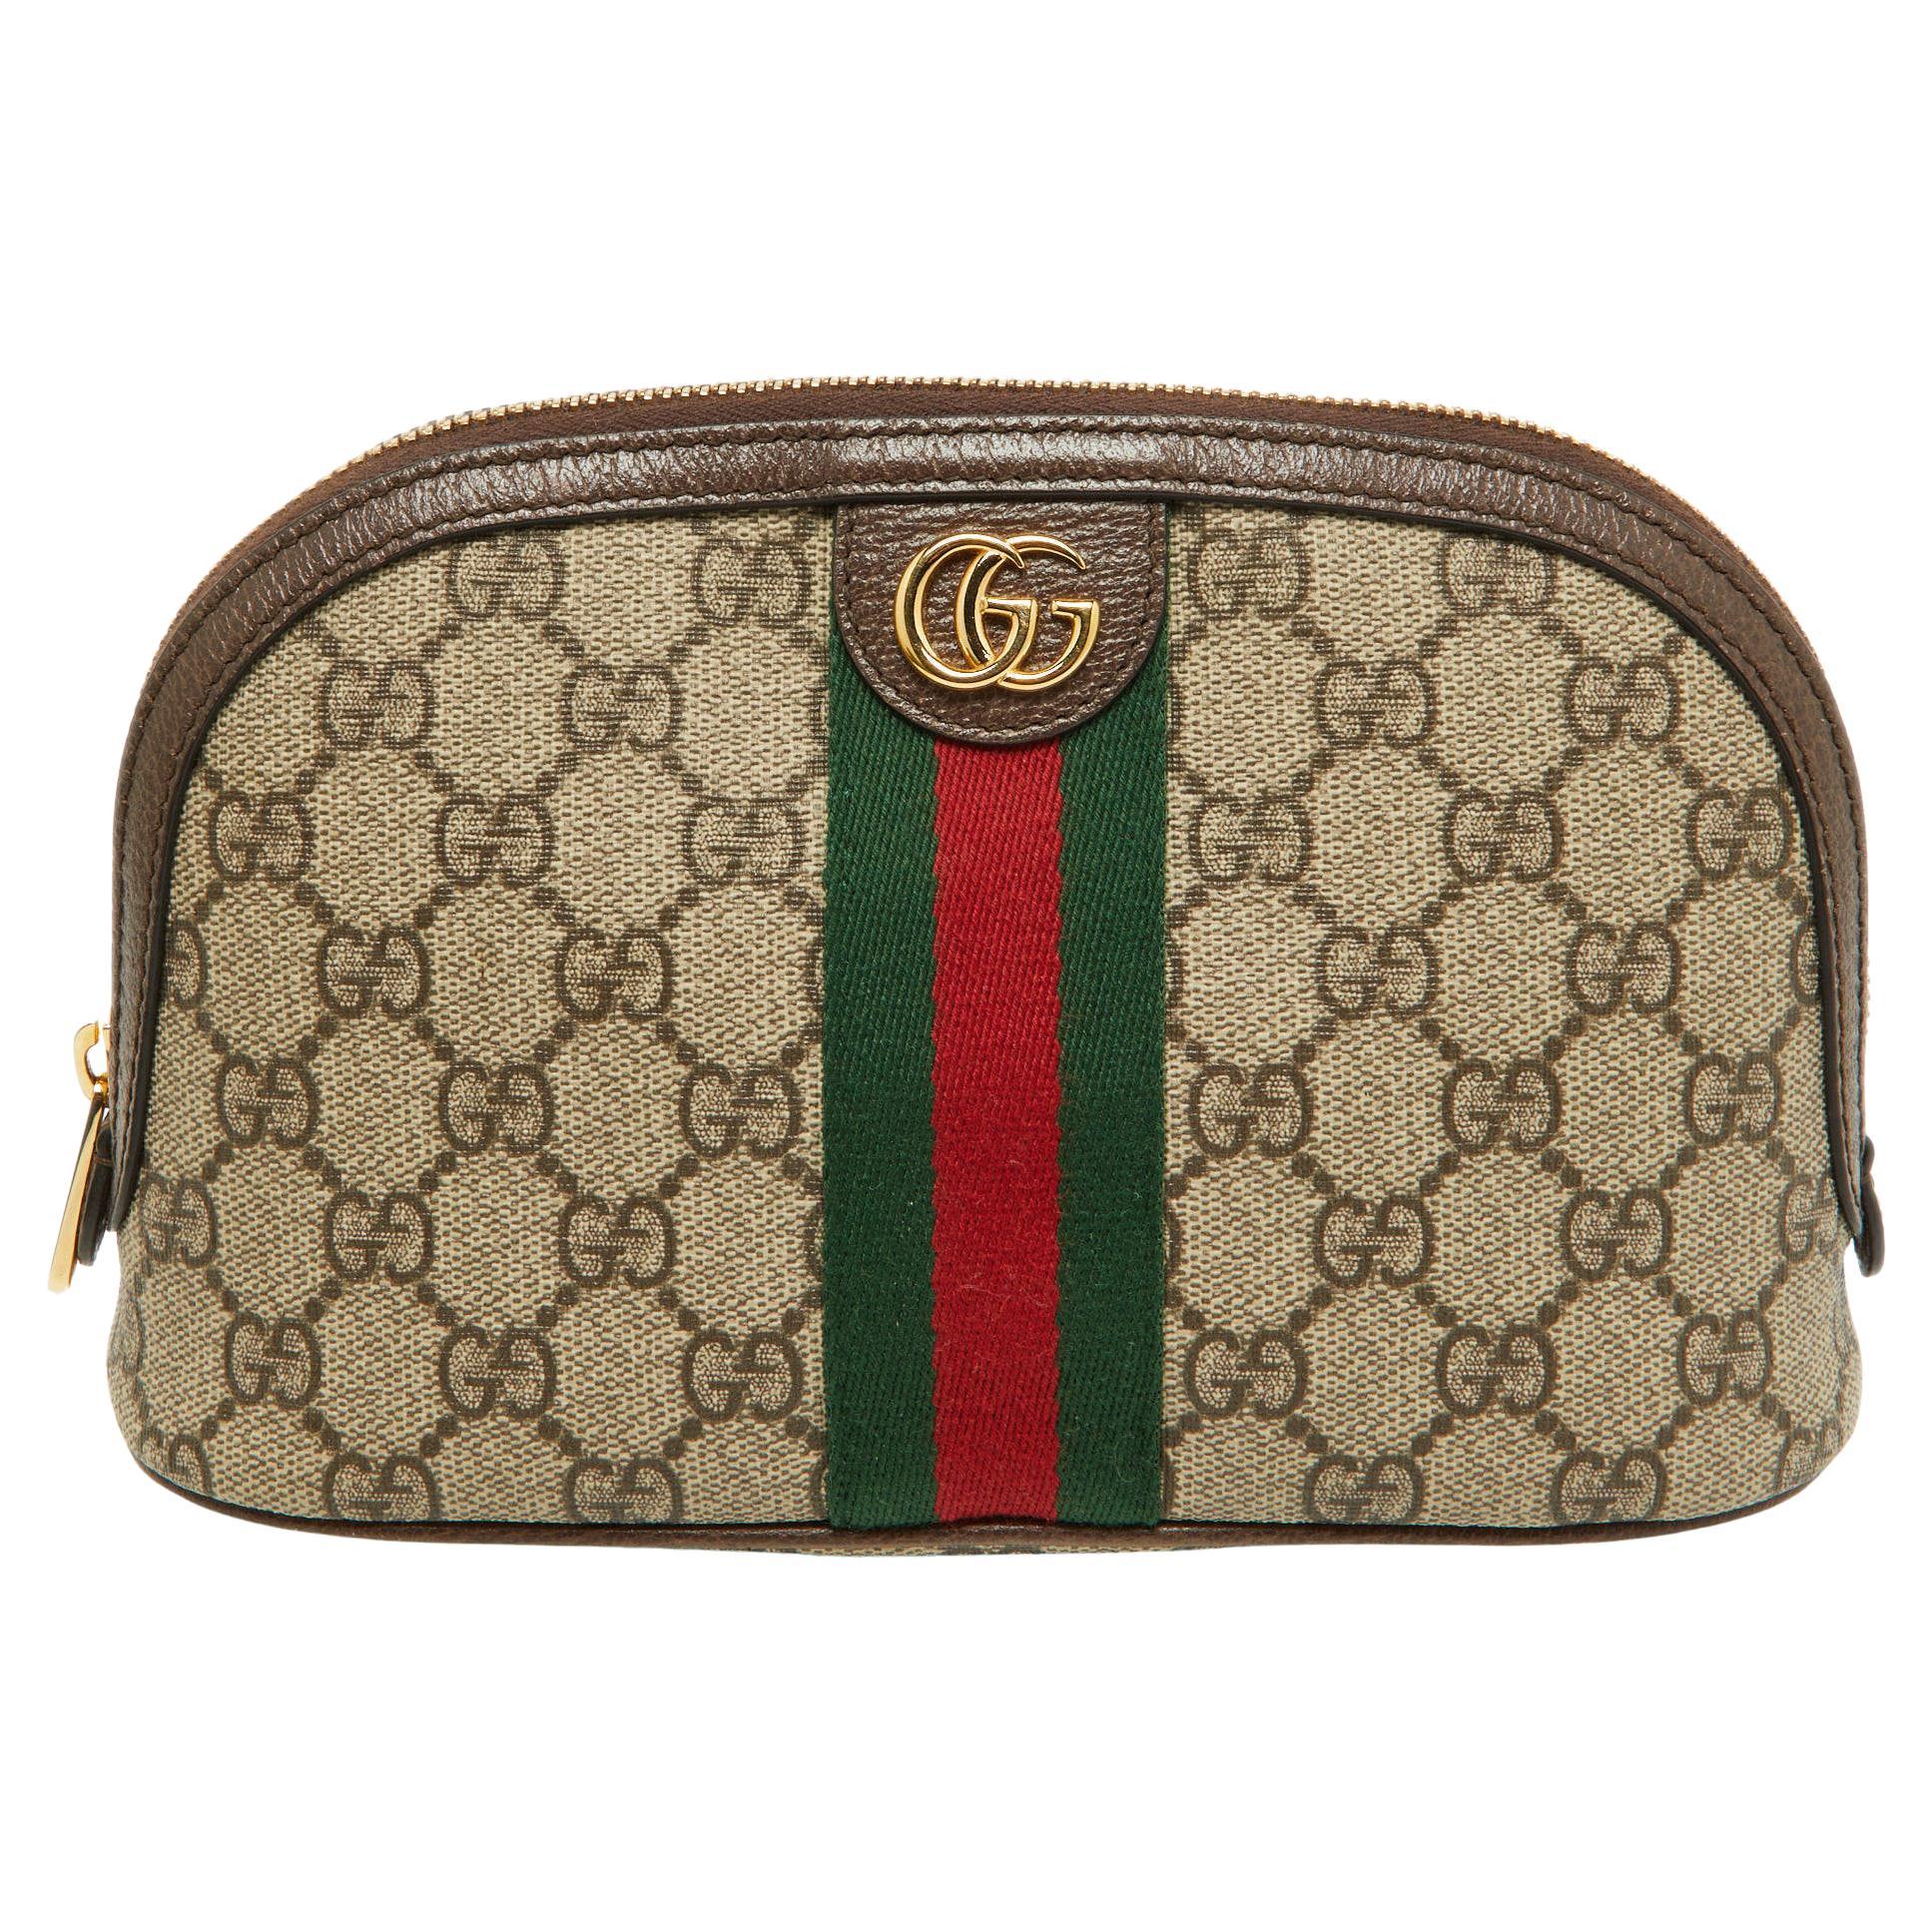 Gucci Beige GG Supreme Canvas and Leather Pouch